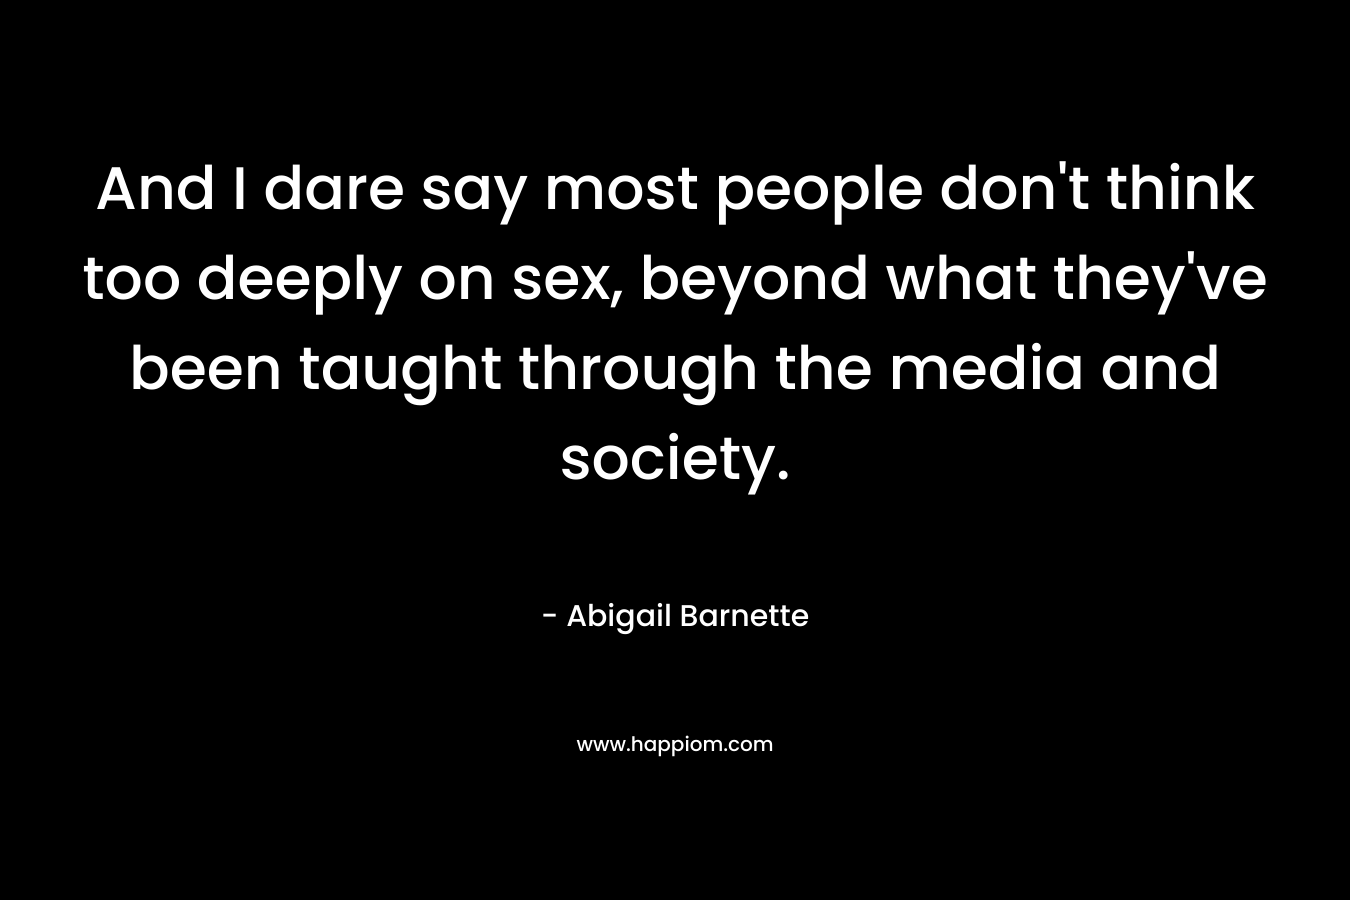 And I dare say most people don't think too deeply on sex, beyond what they've been taught through the media and society.